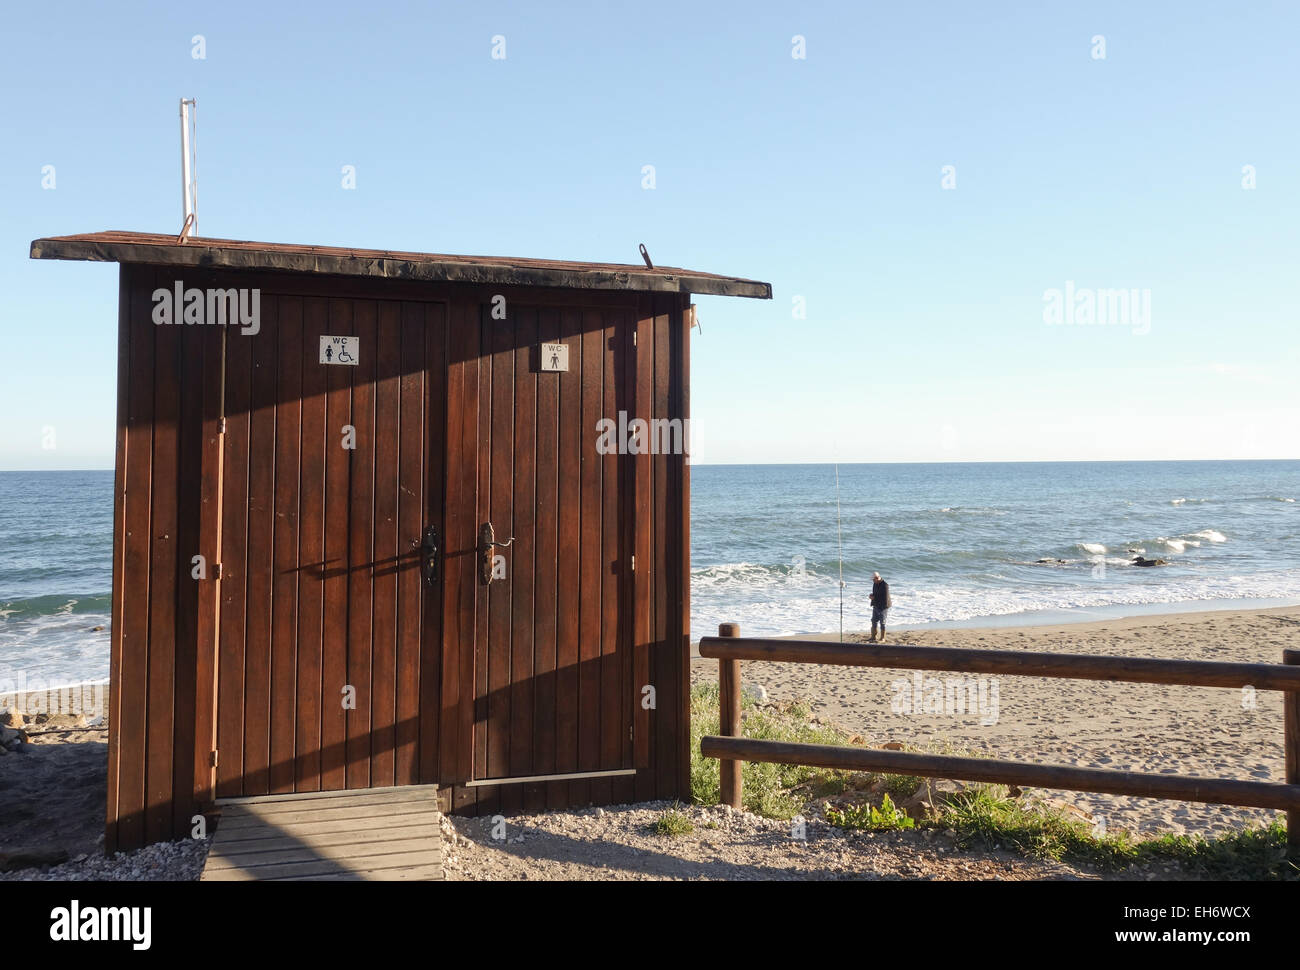 Public toilet, WC, on beach at wooden boardwalk, seafront promenade, Costa del Sol, Andalusia, Spain. Stock Photo